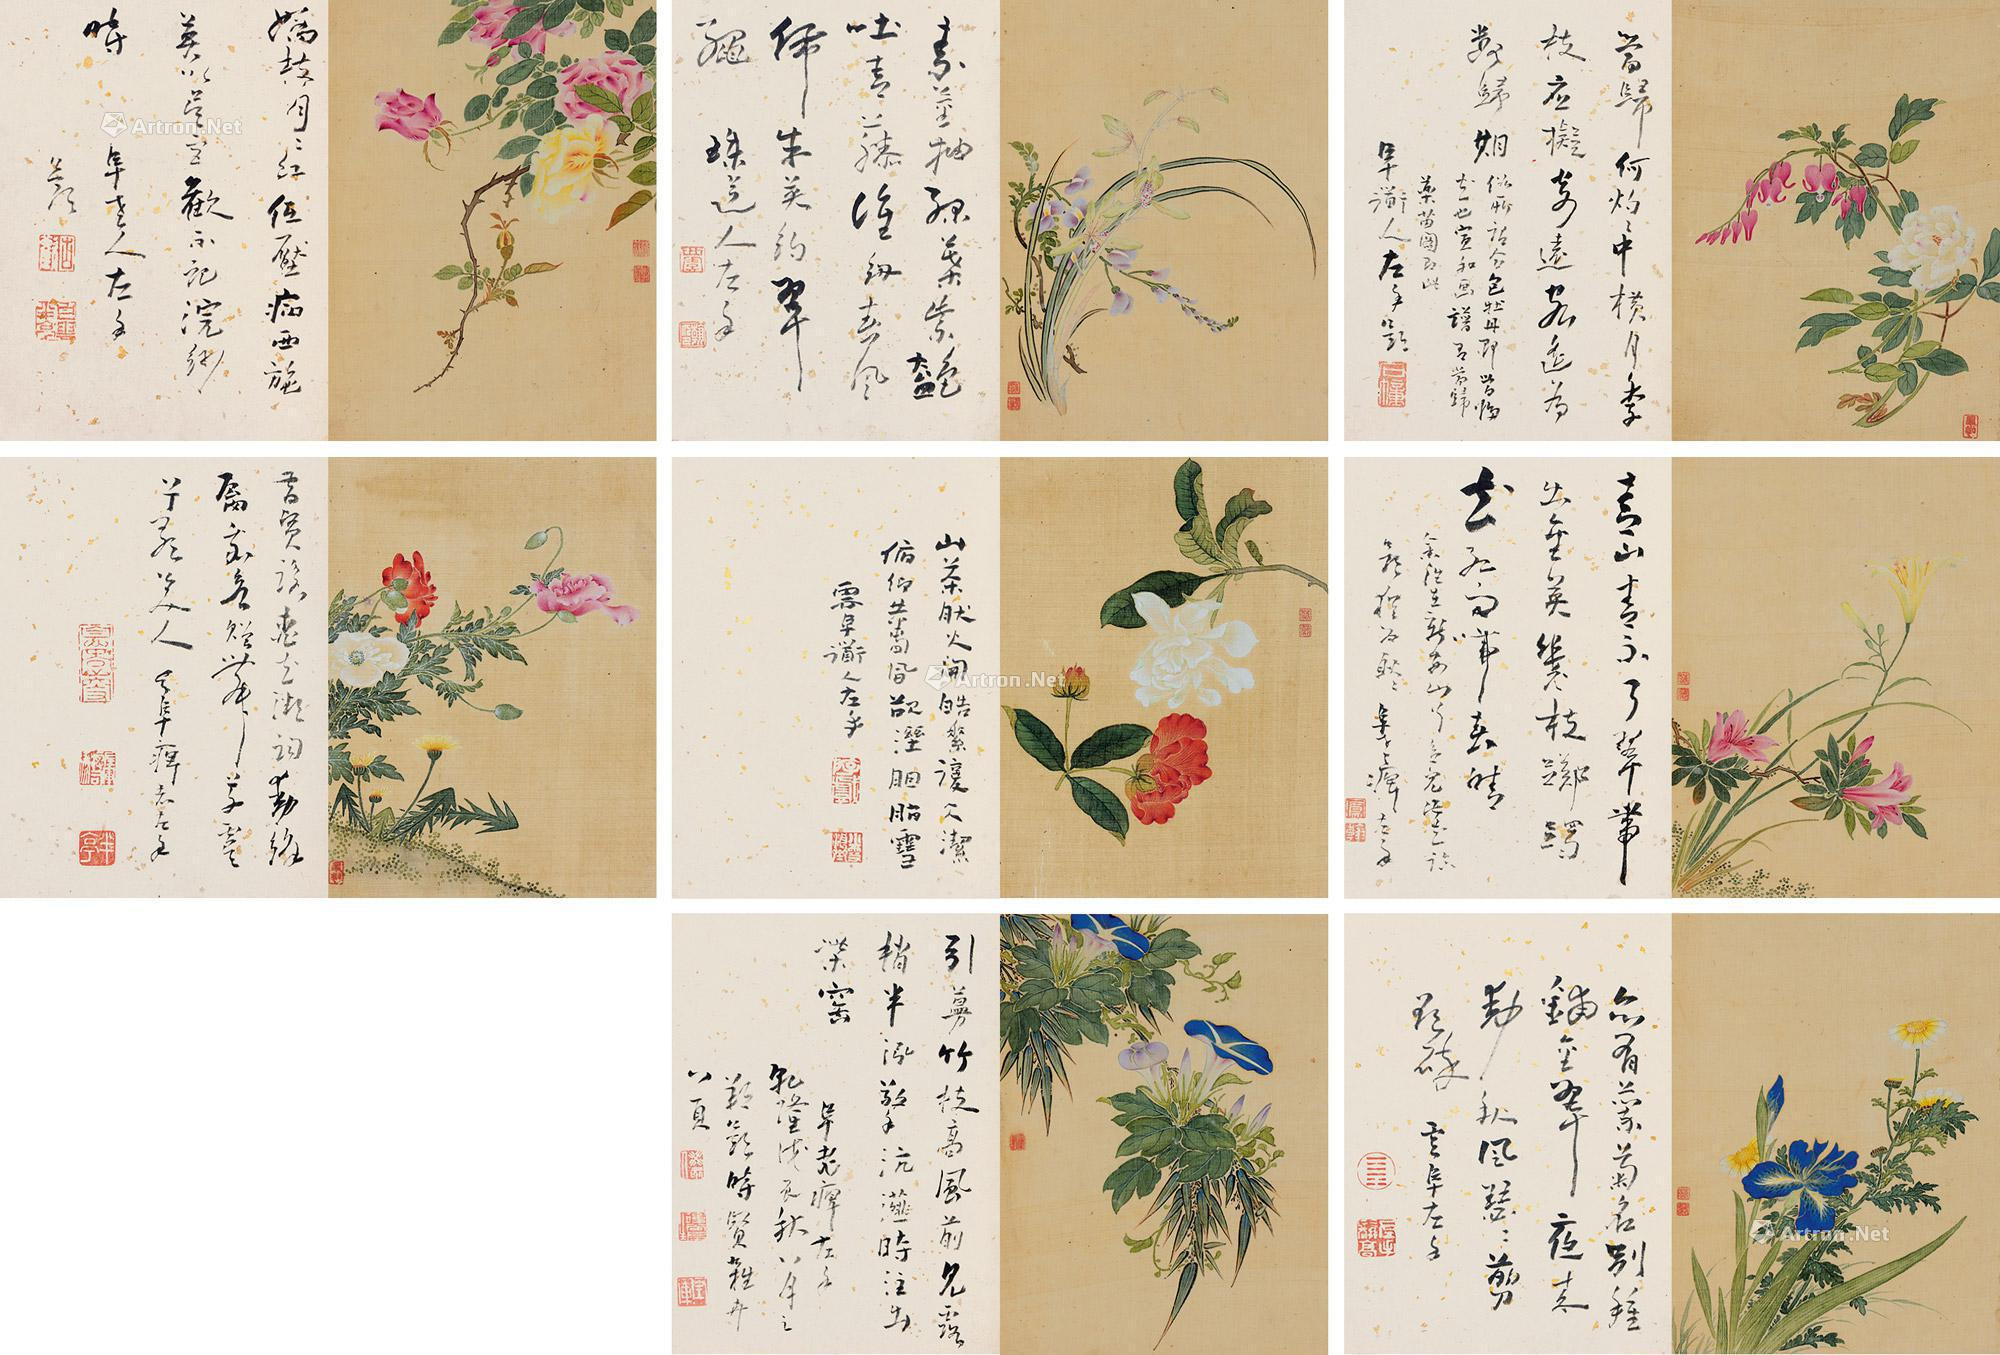 FLOWERS AND CALLIGRAPHY